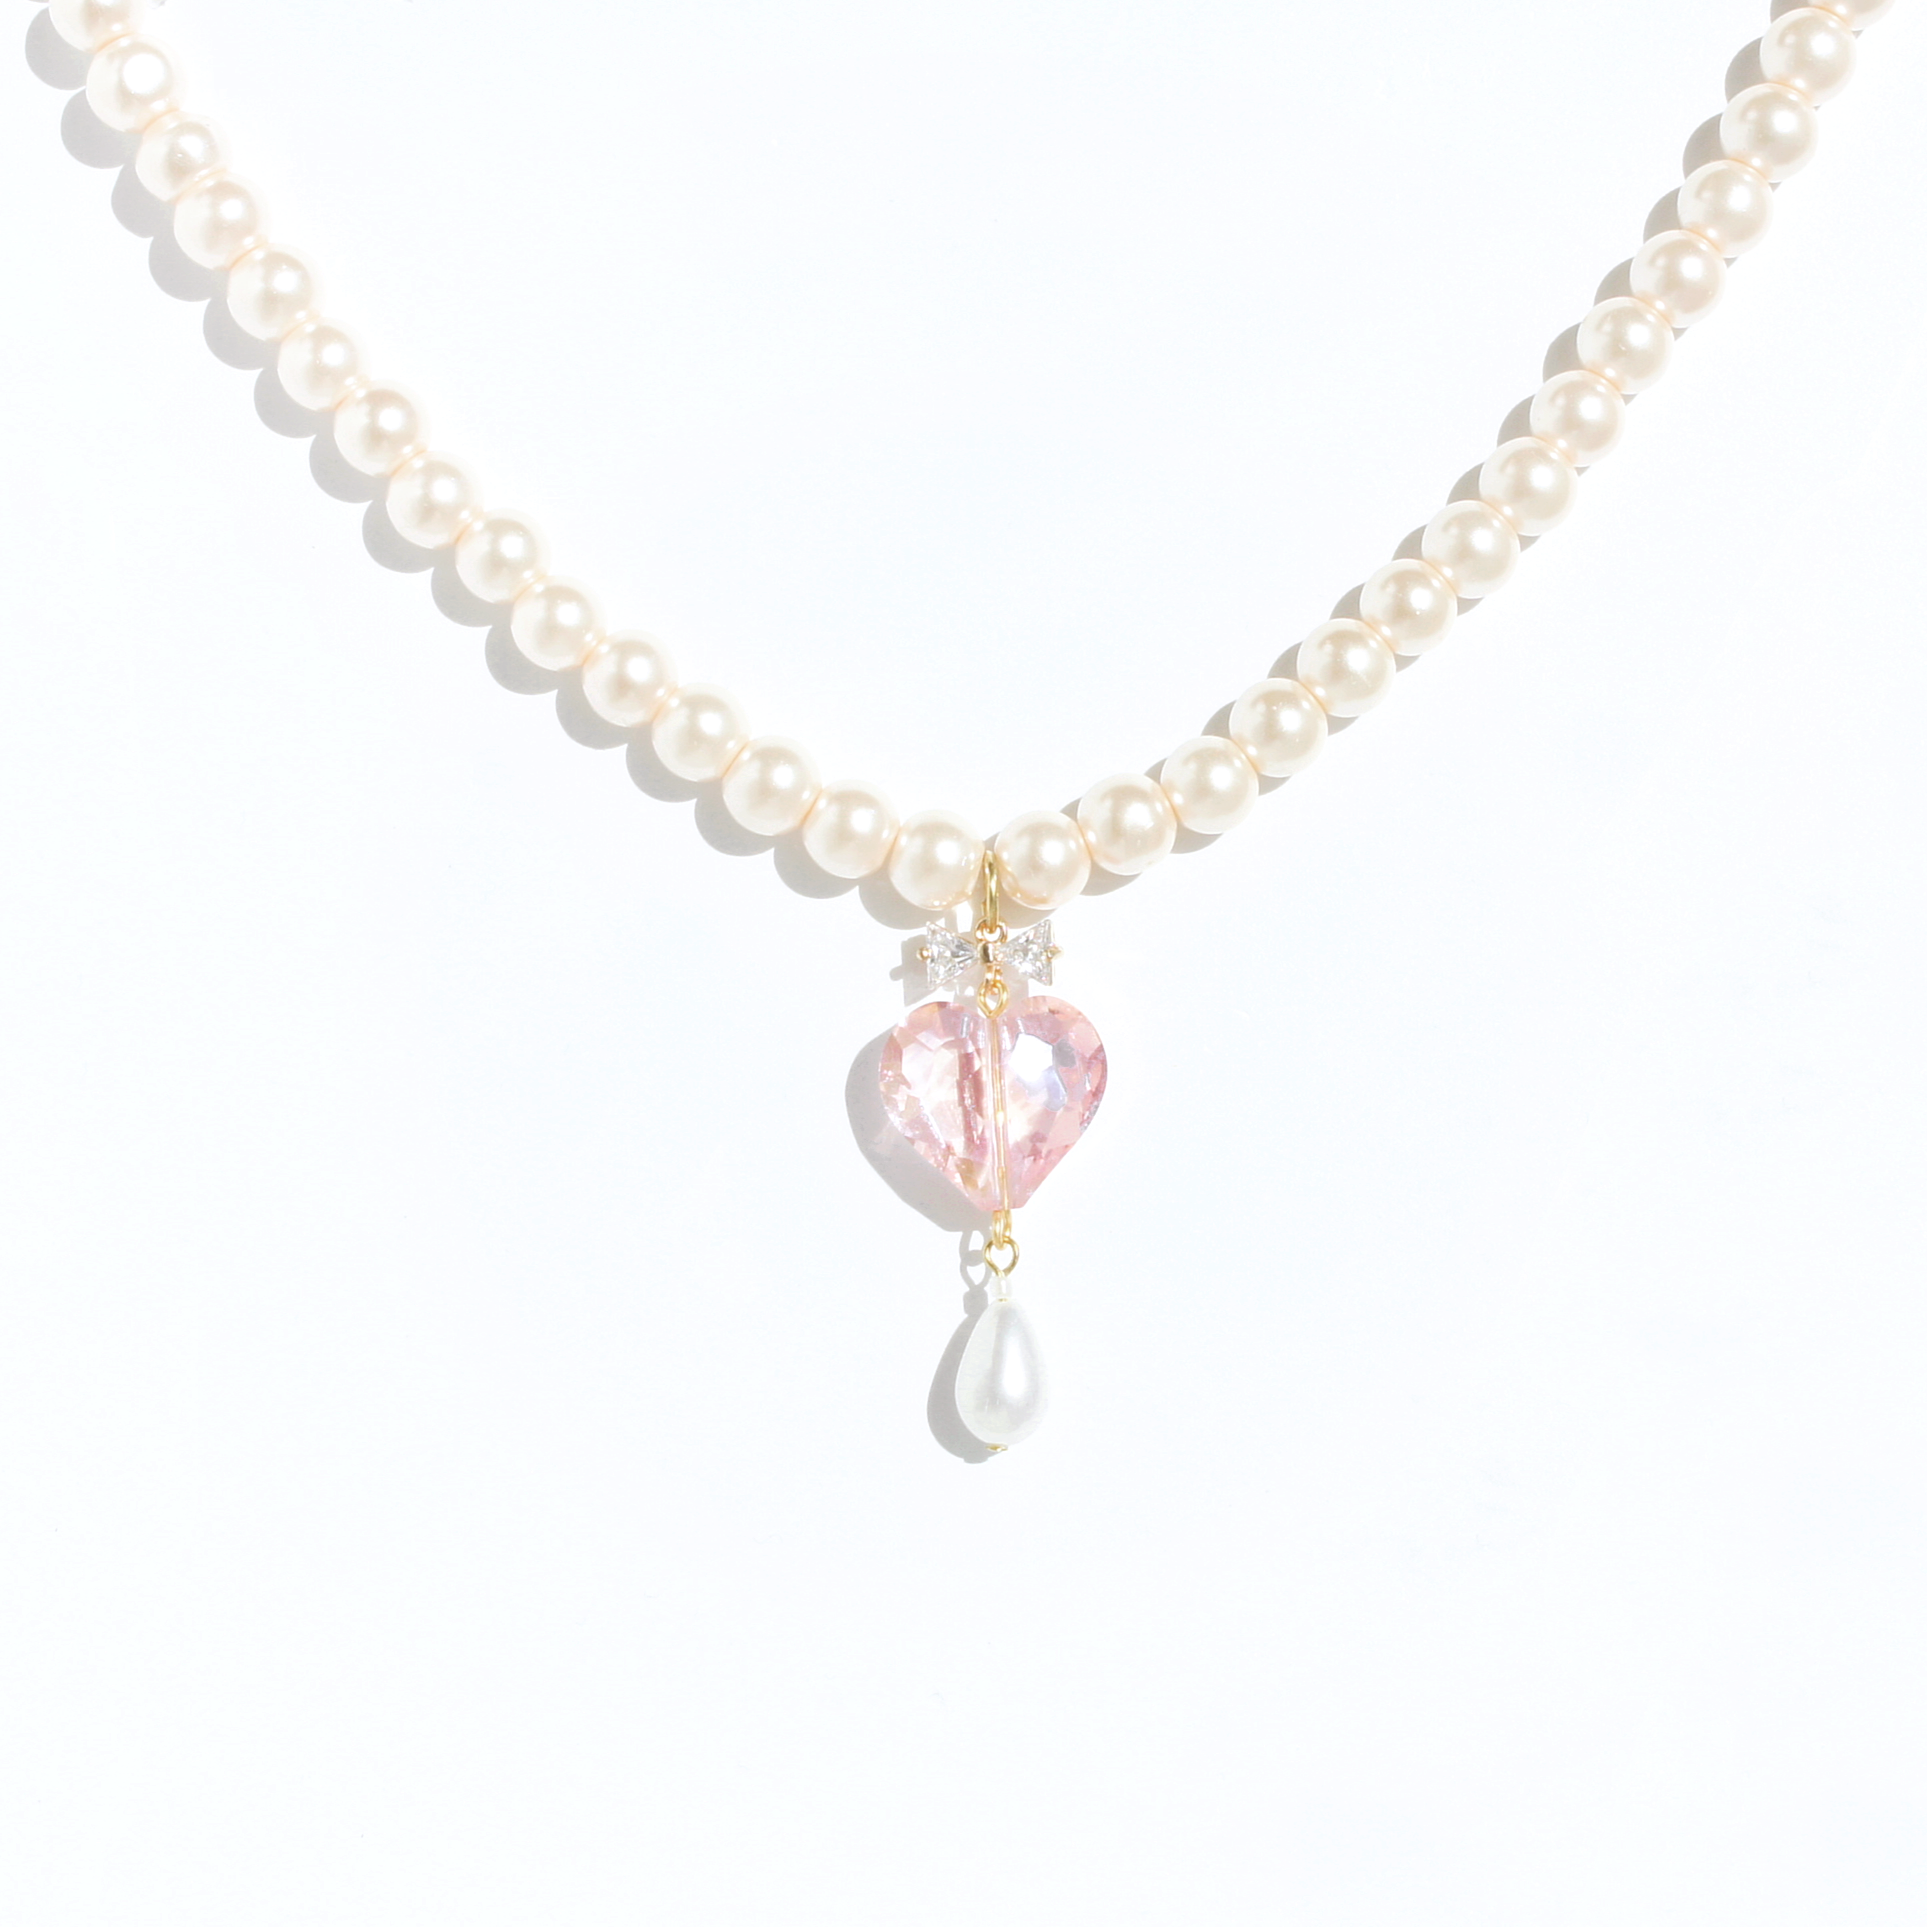 Whisper of Heart Pink Faux Pearl Necklace with Crystal Bow and Faceted Heart Pendant